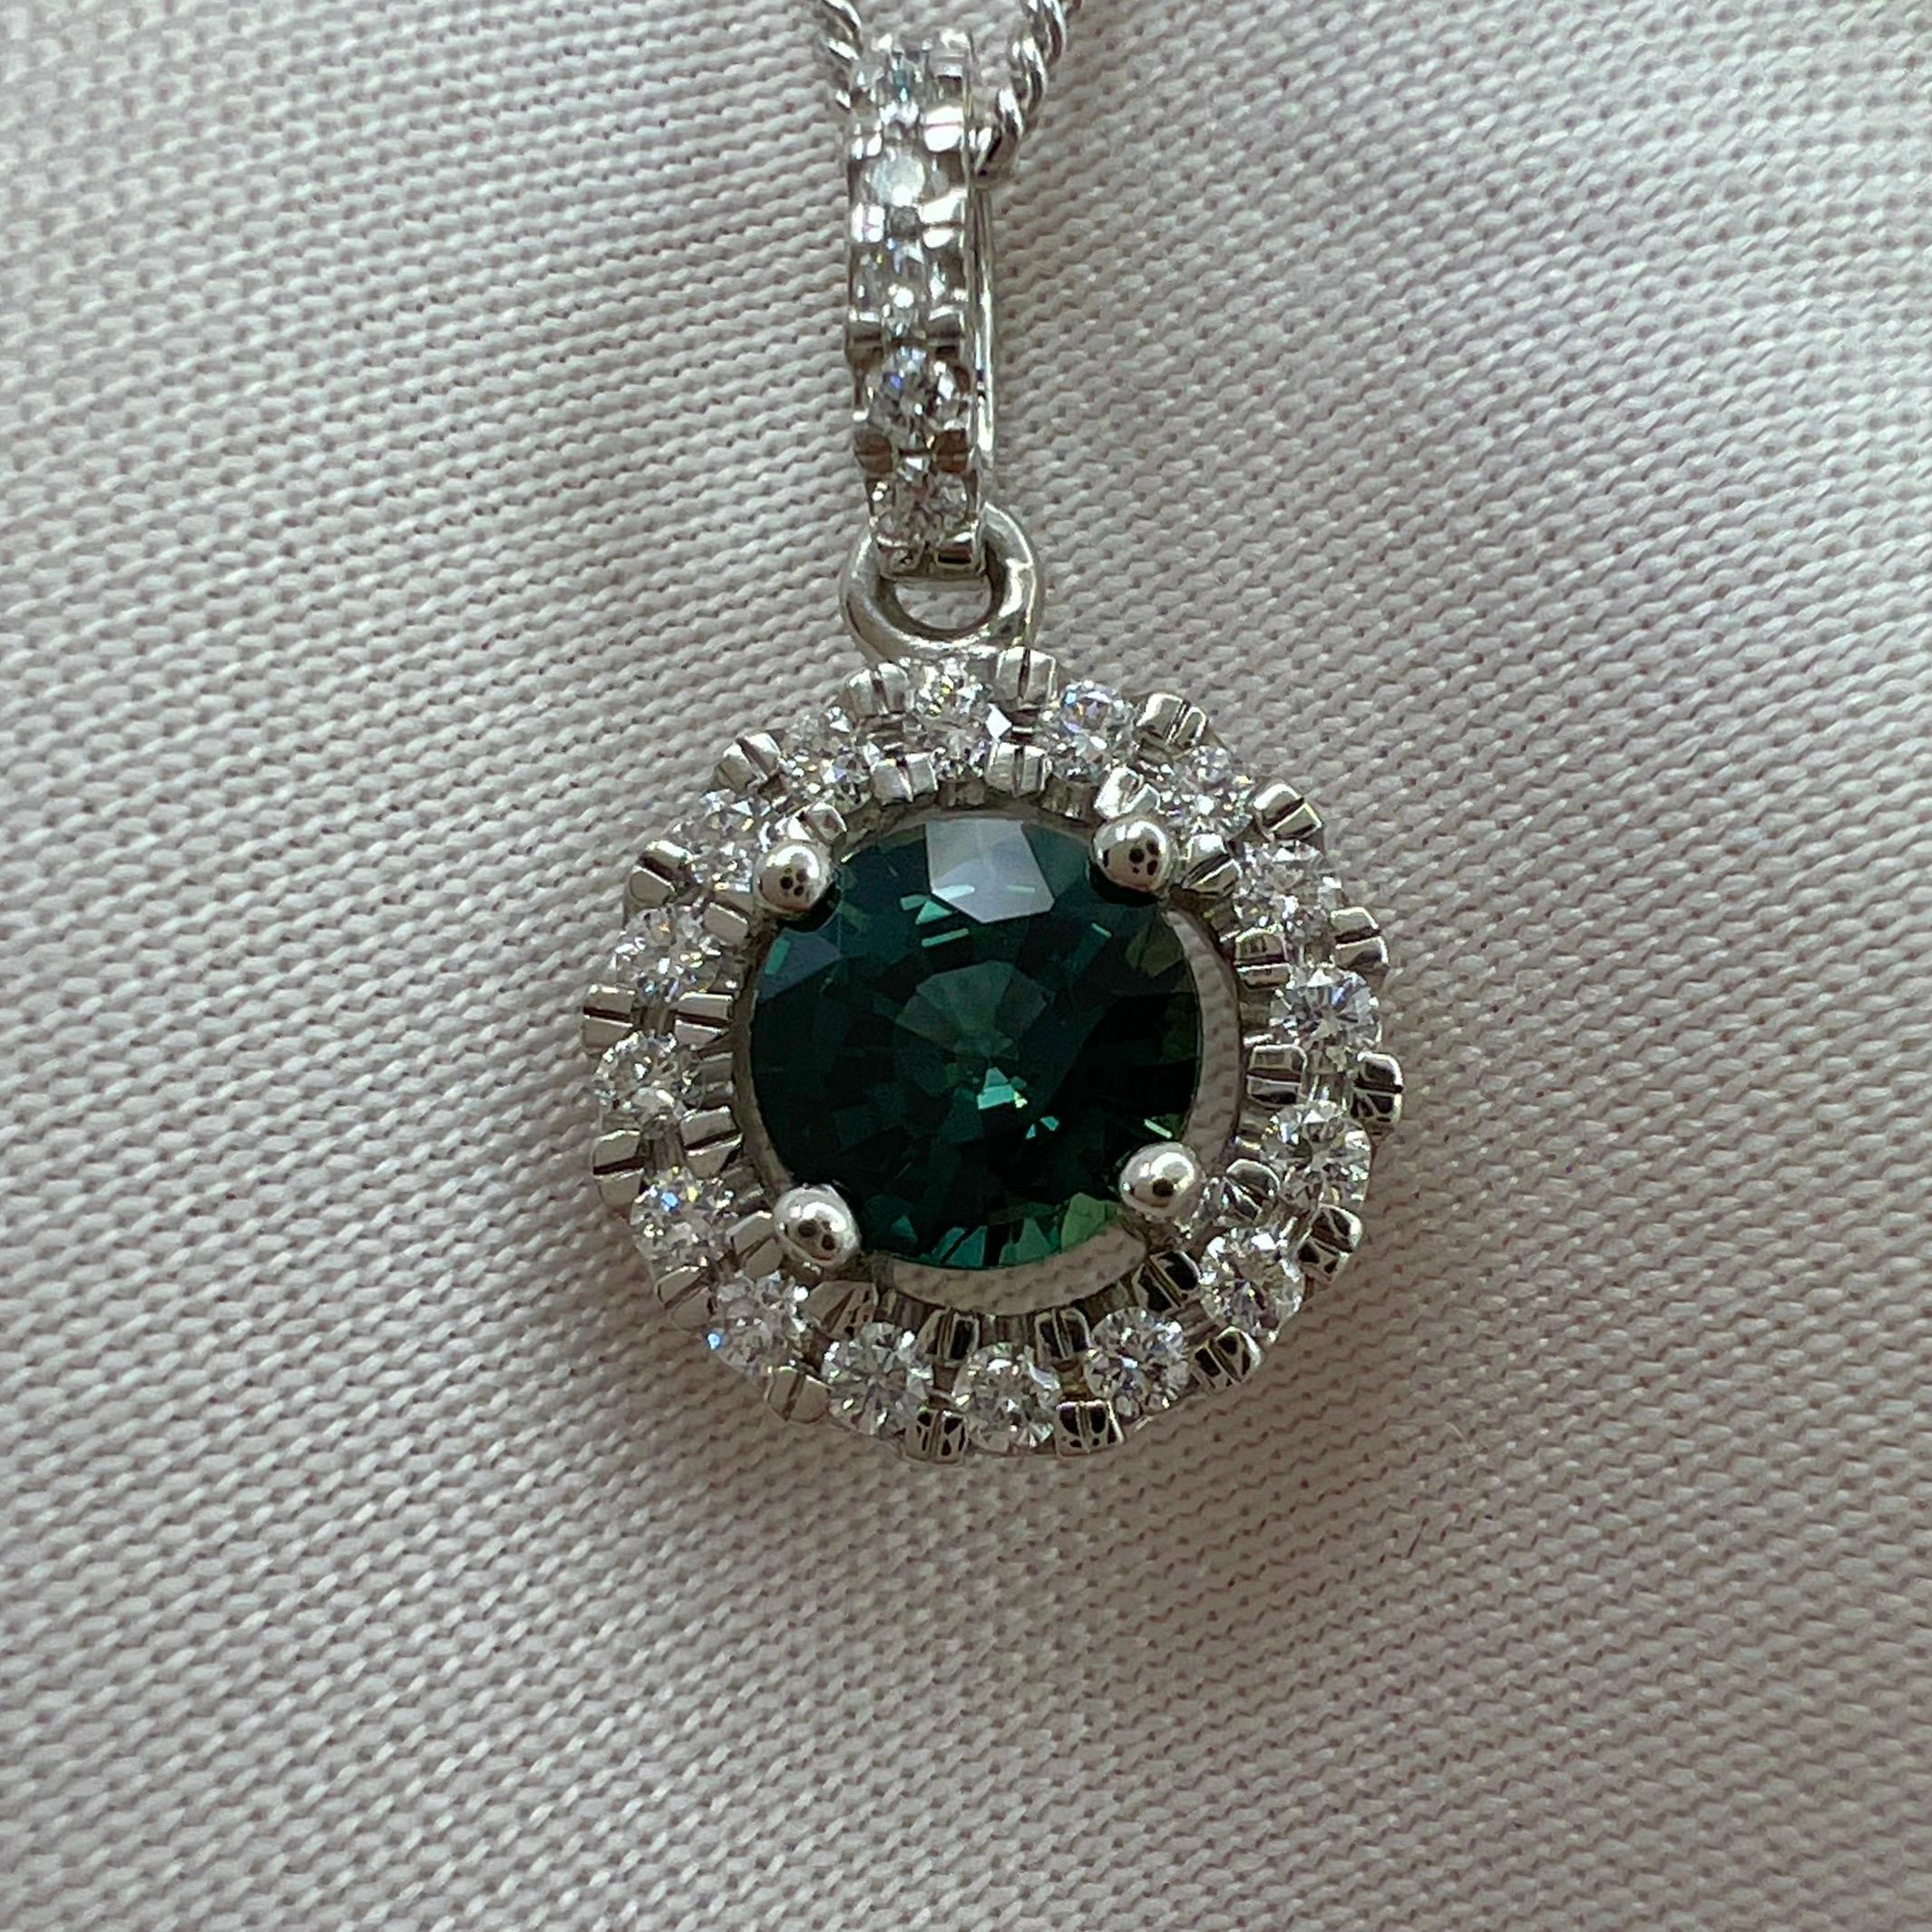 Natural Teal Green Blue Round Cut Australian Sapphire & Diamond Platinum Halo Pendant.

0.63 Carat centre sapphire with a fine deep green-blue teal colour and excellent clarity, very clean gem. Measures 5mm. Also has an excellent round cut. Fine top